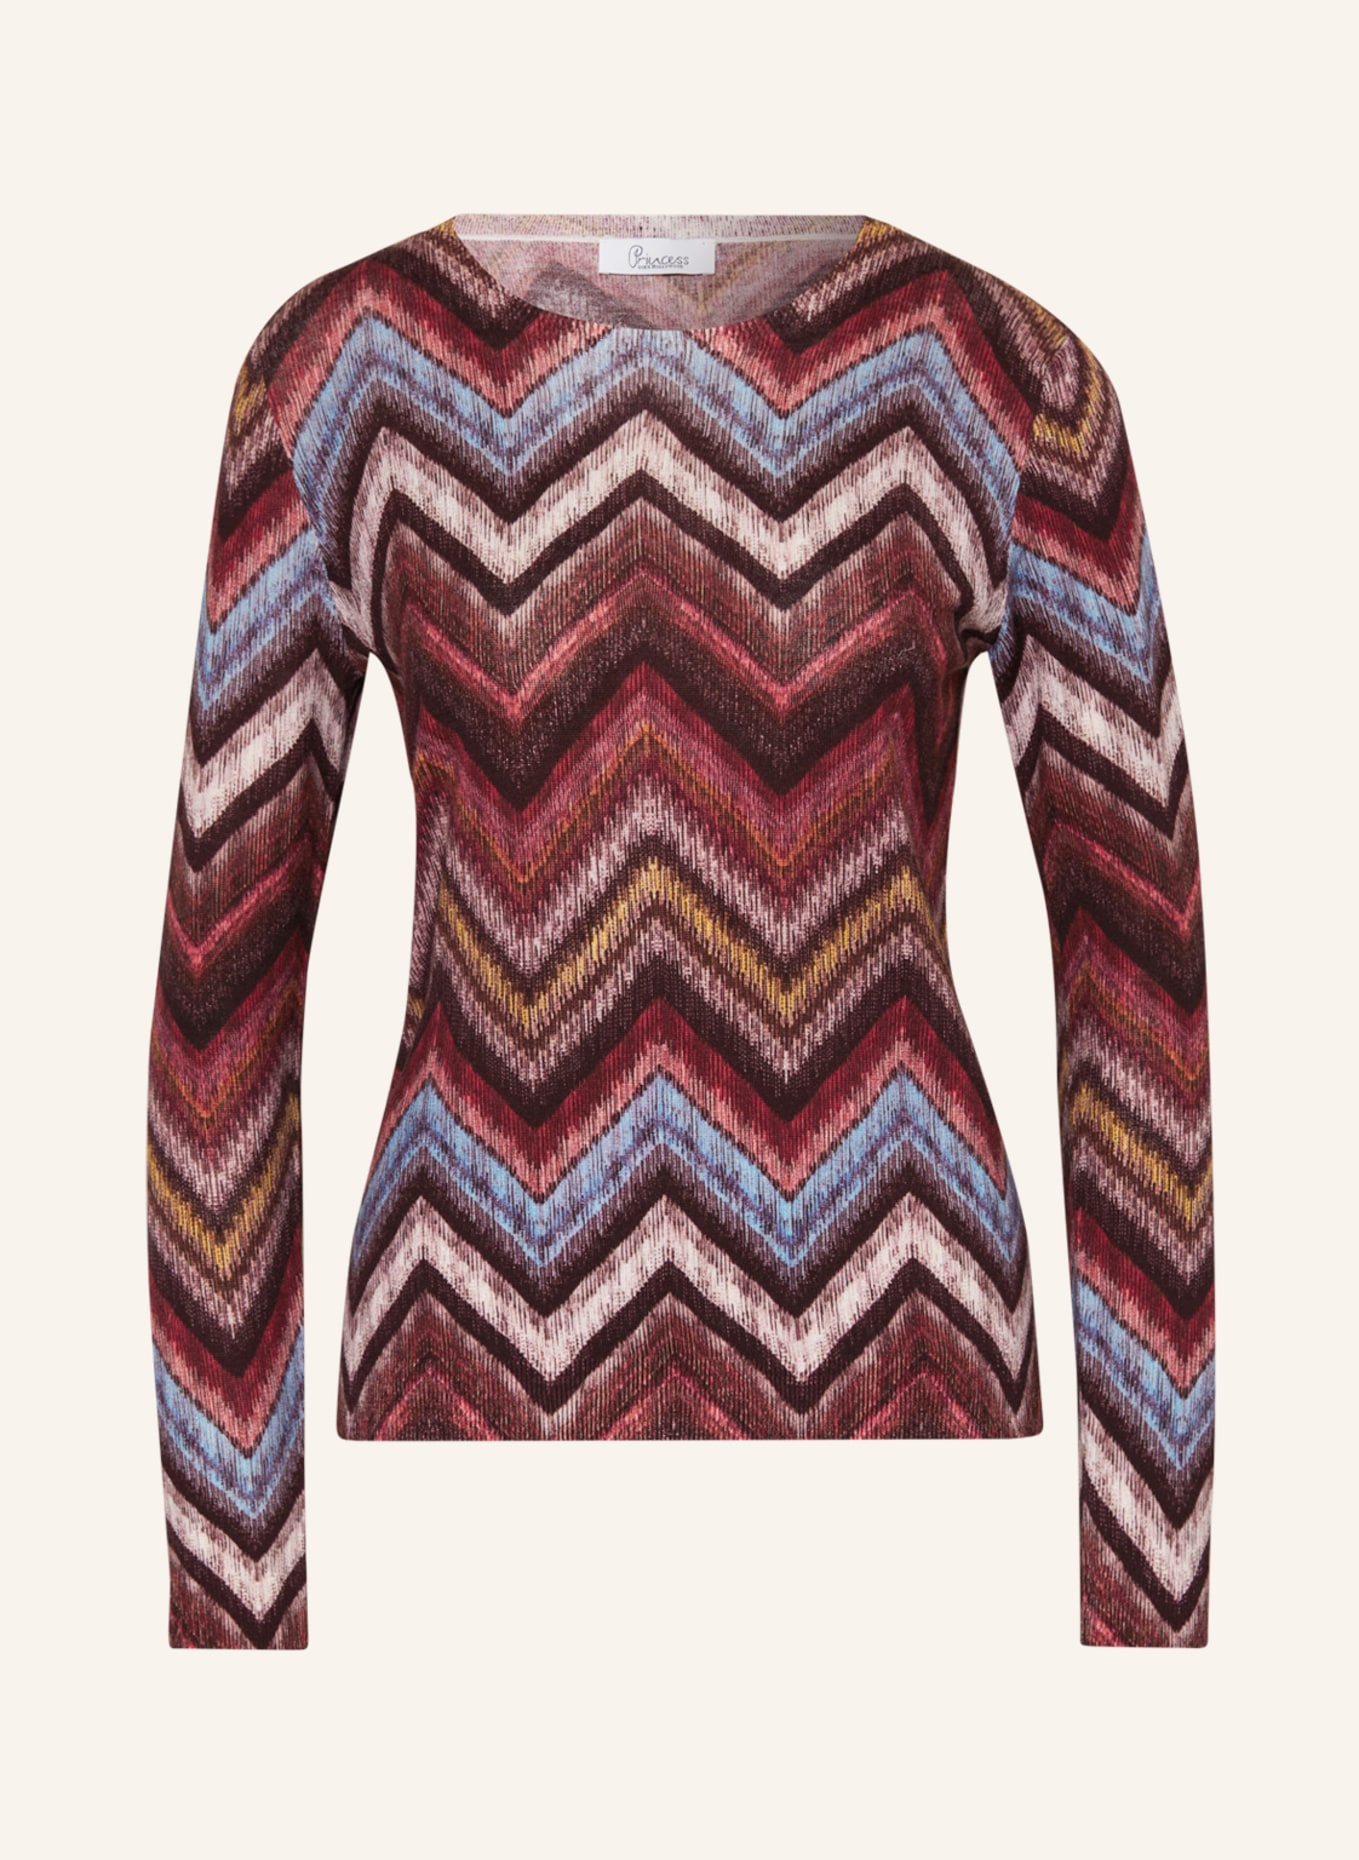 Princess GOES HOLLYWOOD Sweater, Color: DARK RED/ BLUE GRAY/ LIGHT PINK (Image 1)